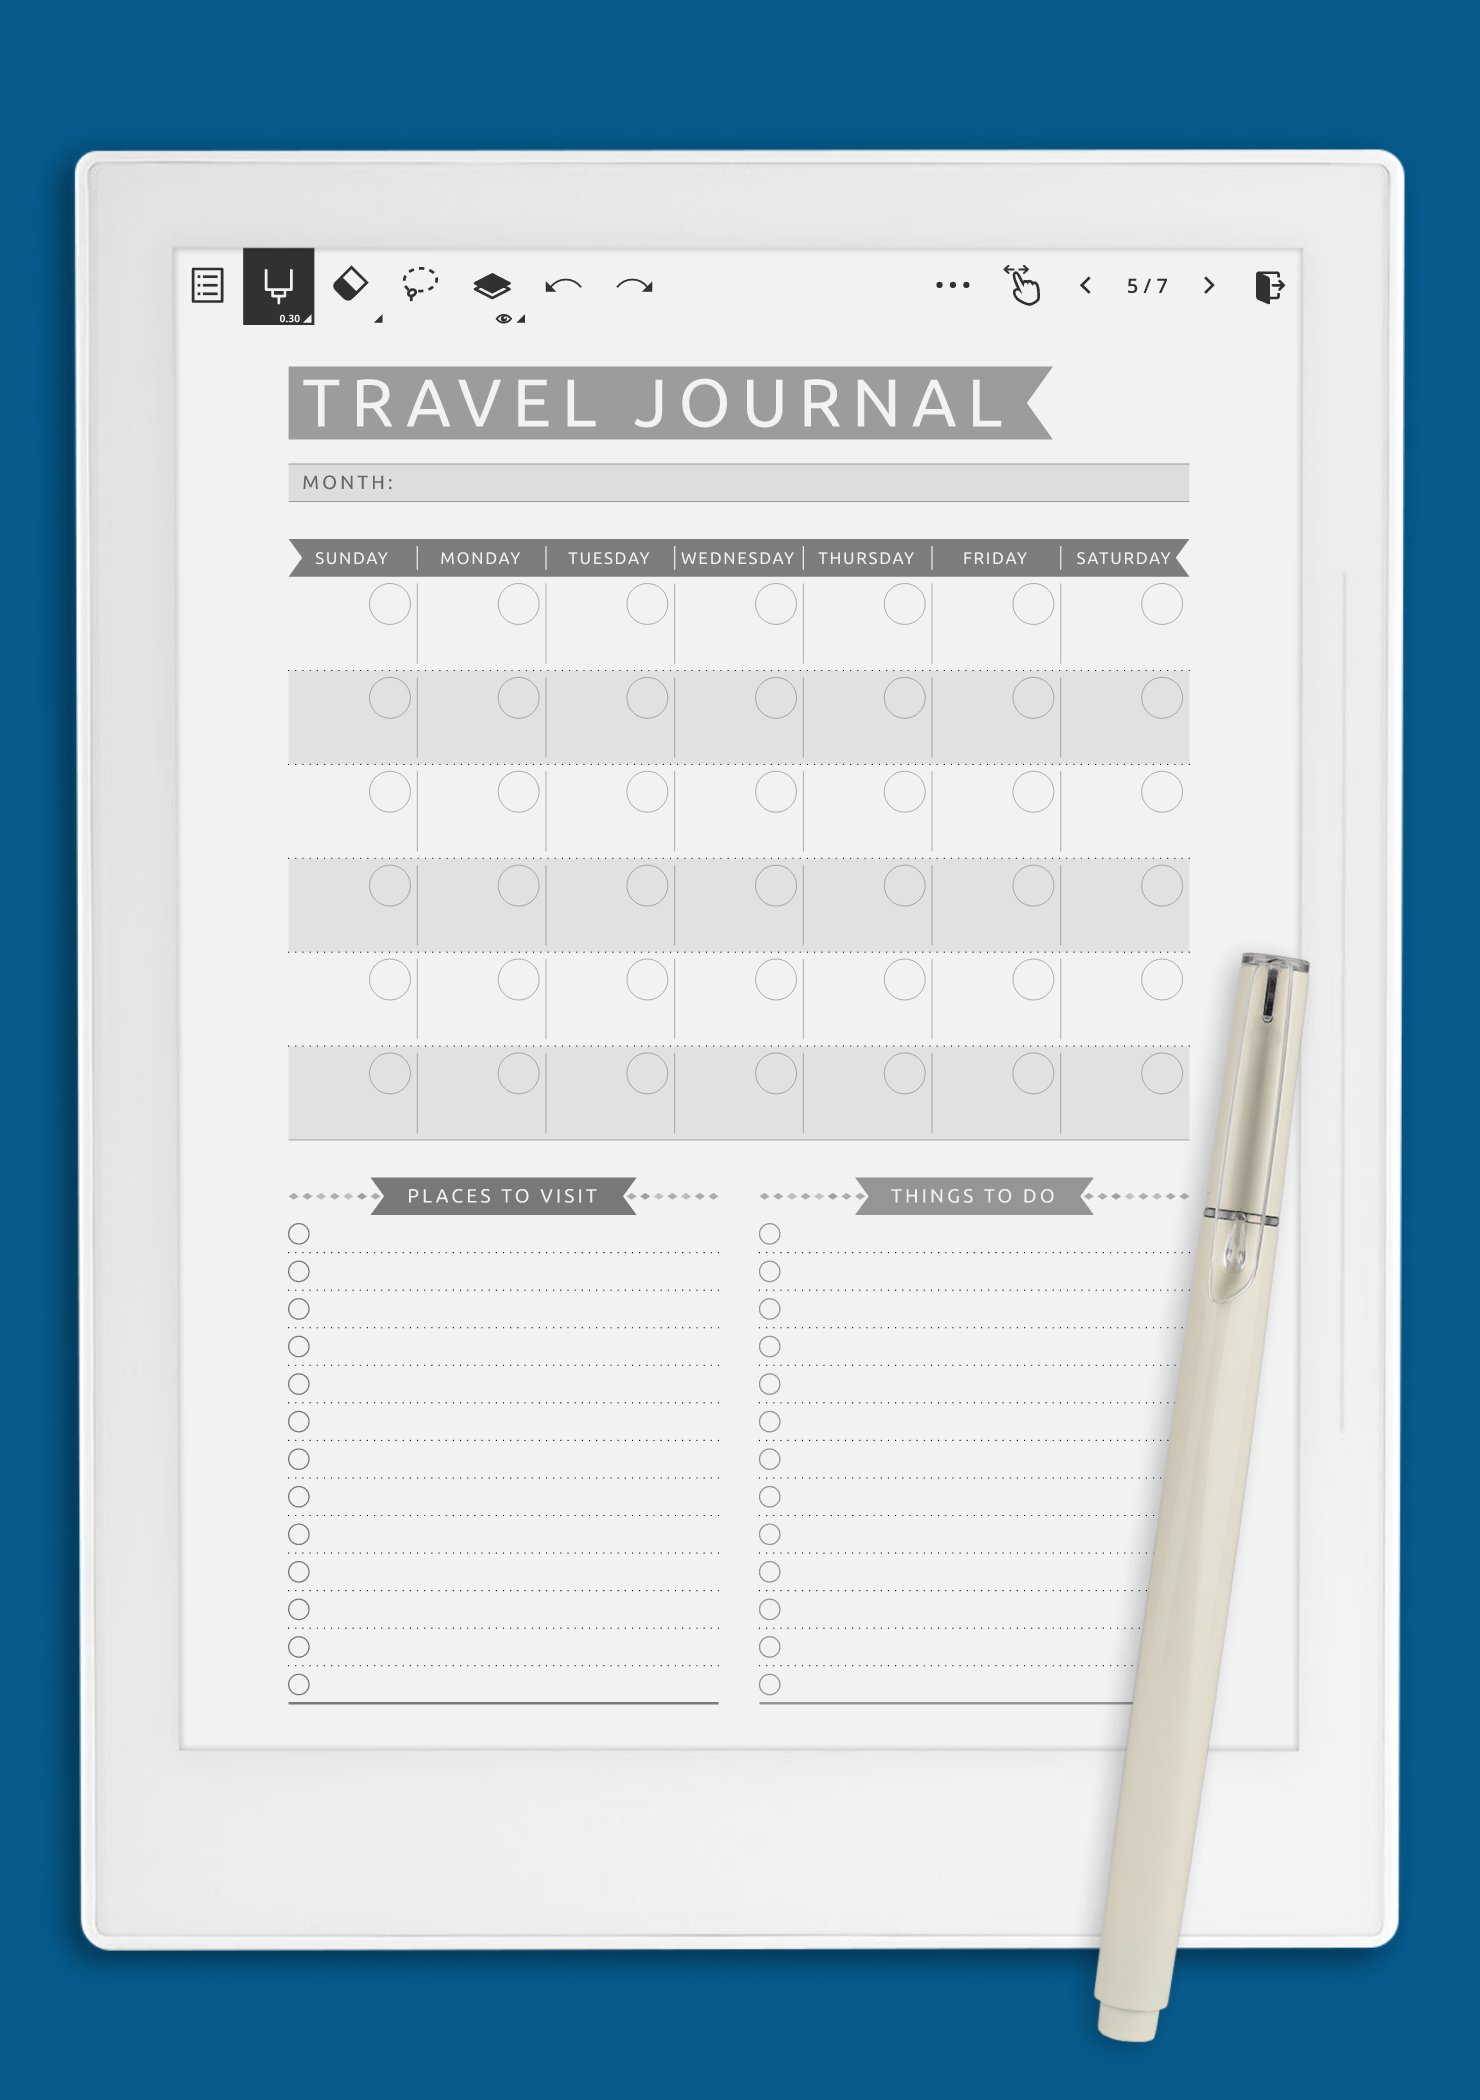 Download Printable Travel Journal Template - Casual Style PDF